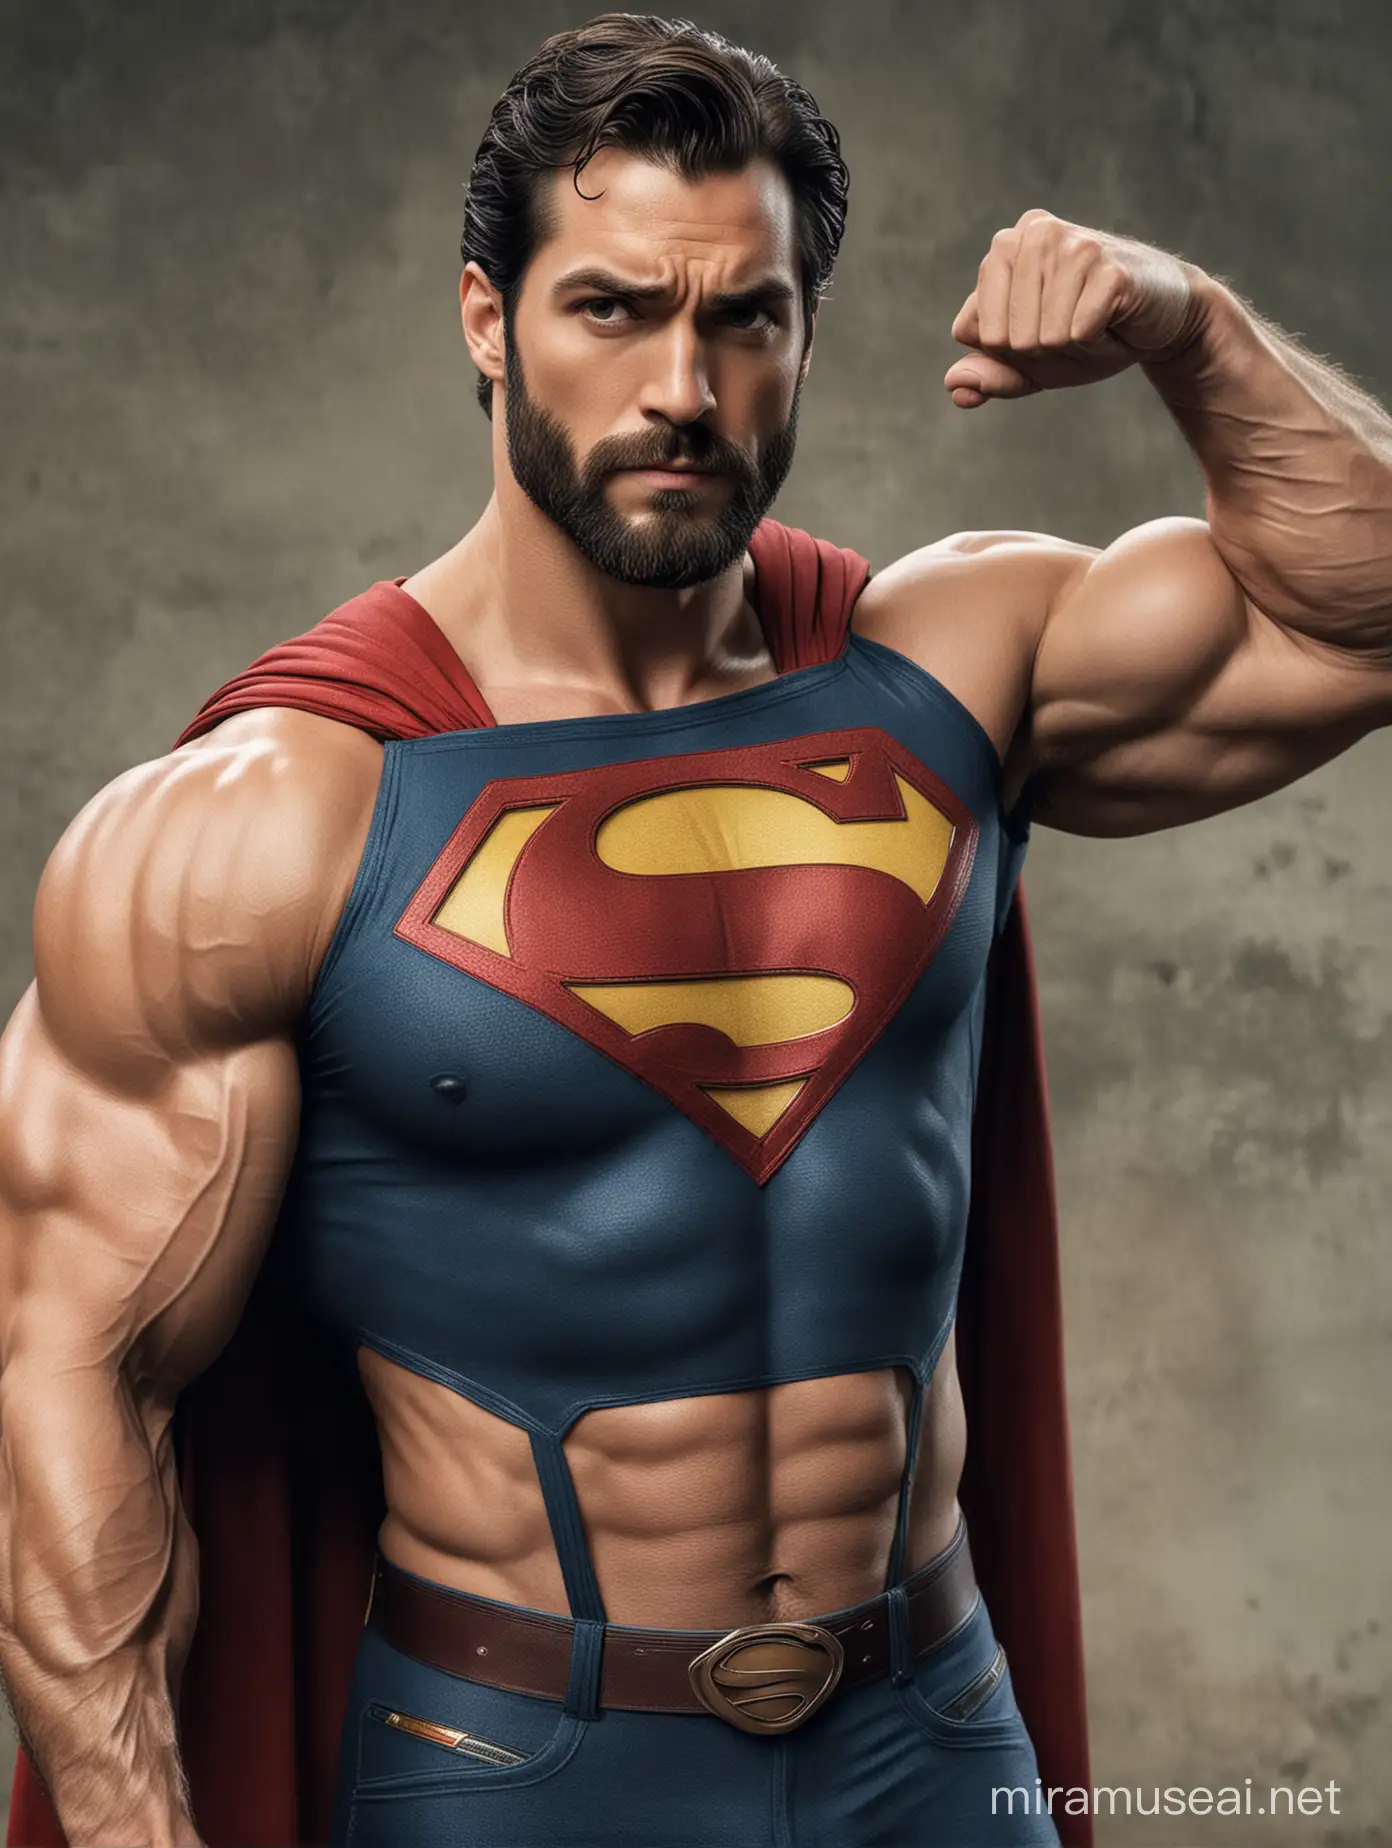 Bearded Superman Flexing Biceps and Revealing SixPack Abs